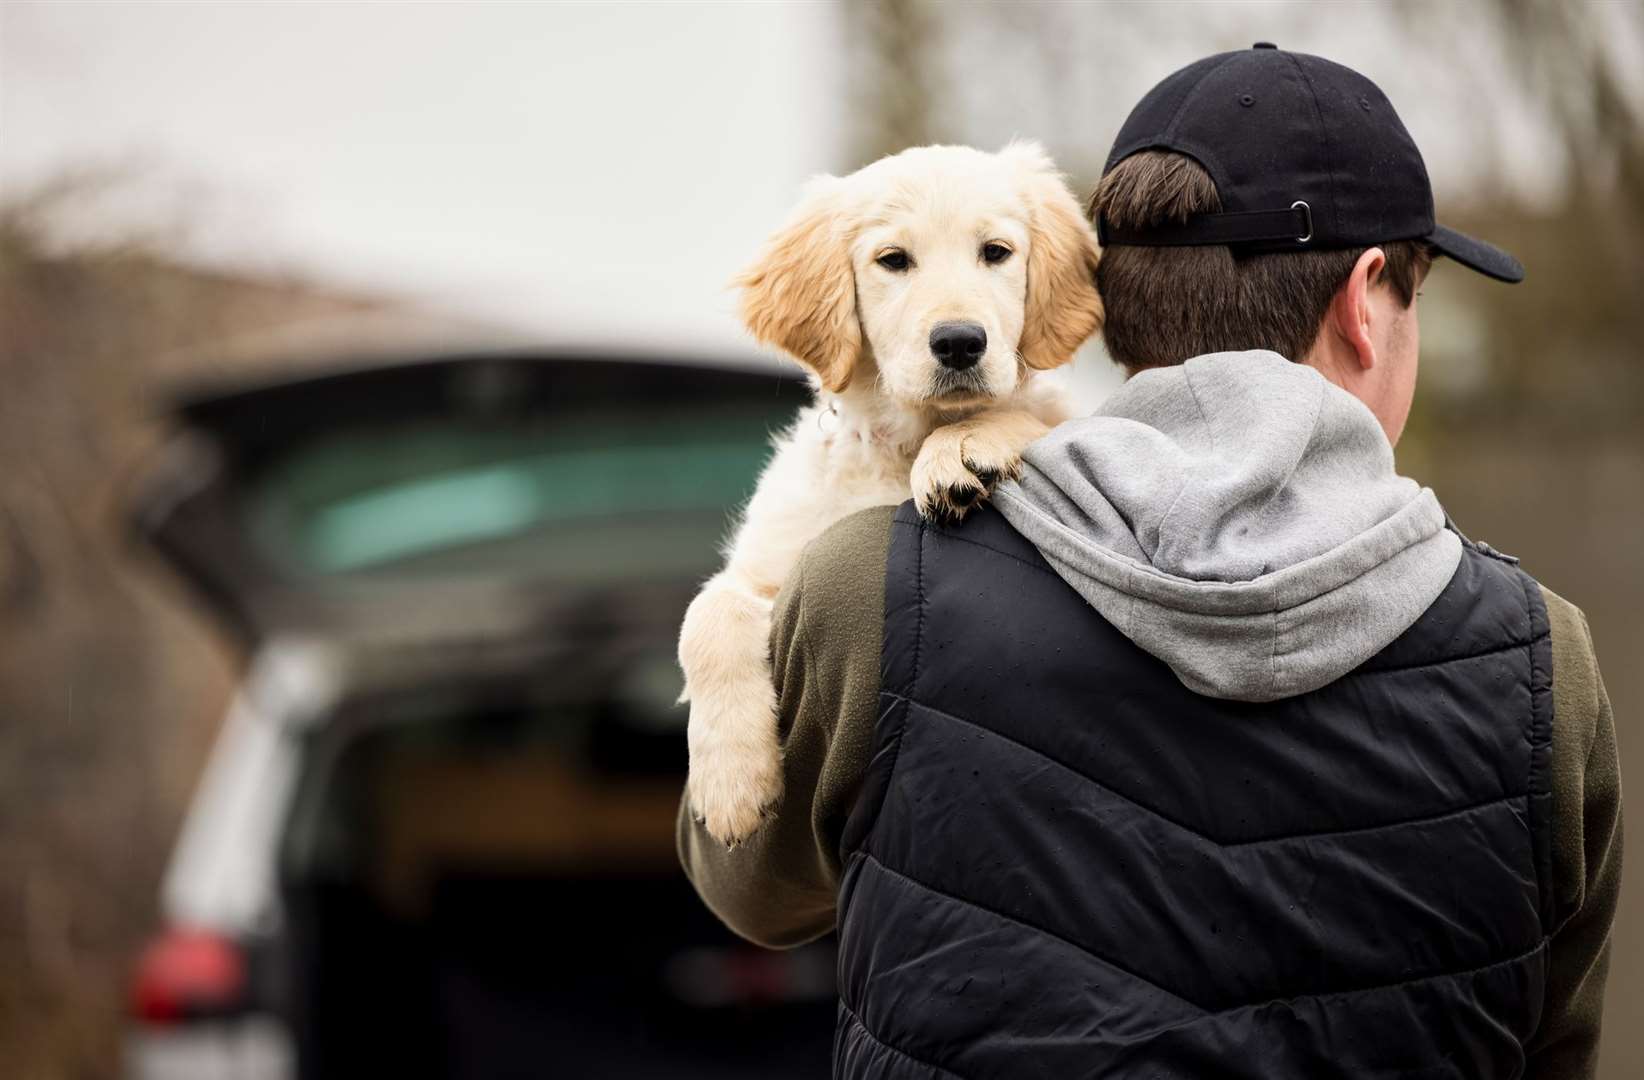 Training a puppy has never been easier thanks to the vast amount of information on the internet.  Image from a picture agency